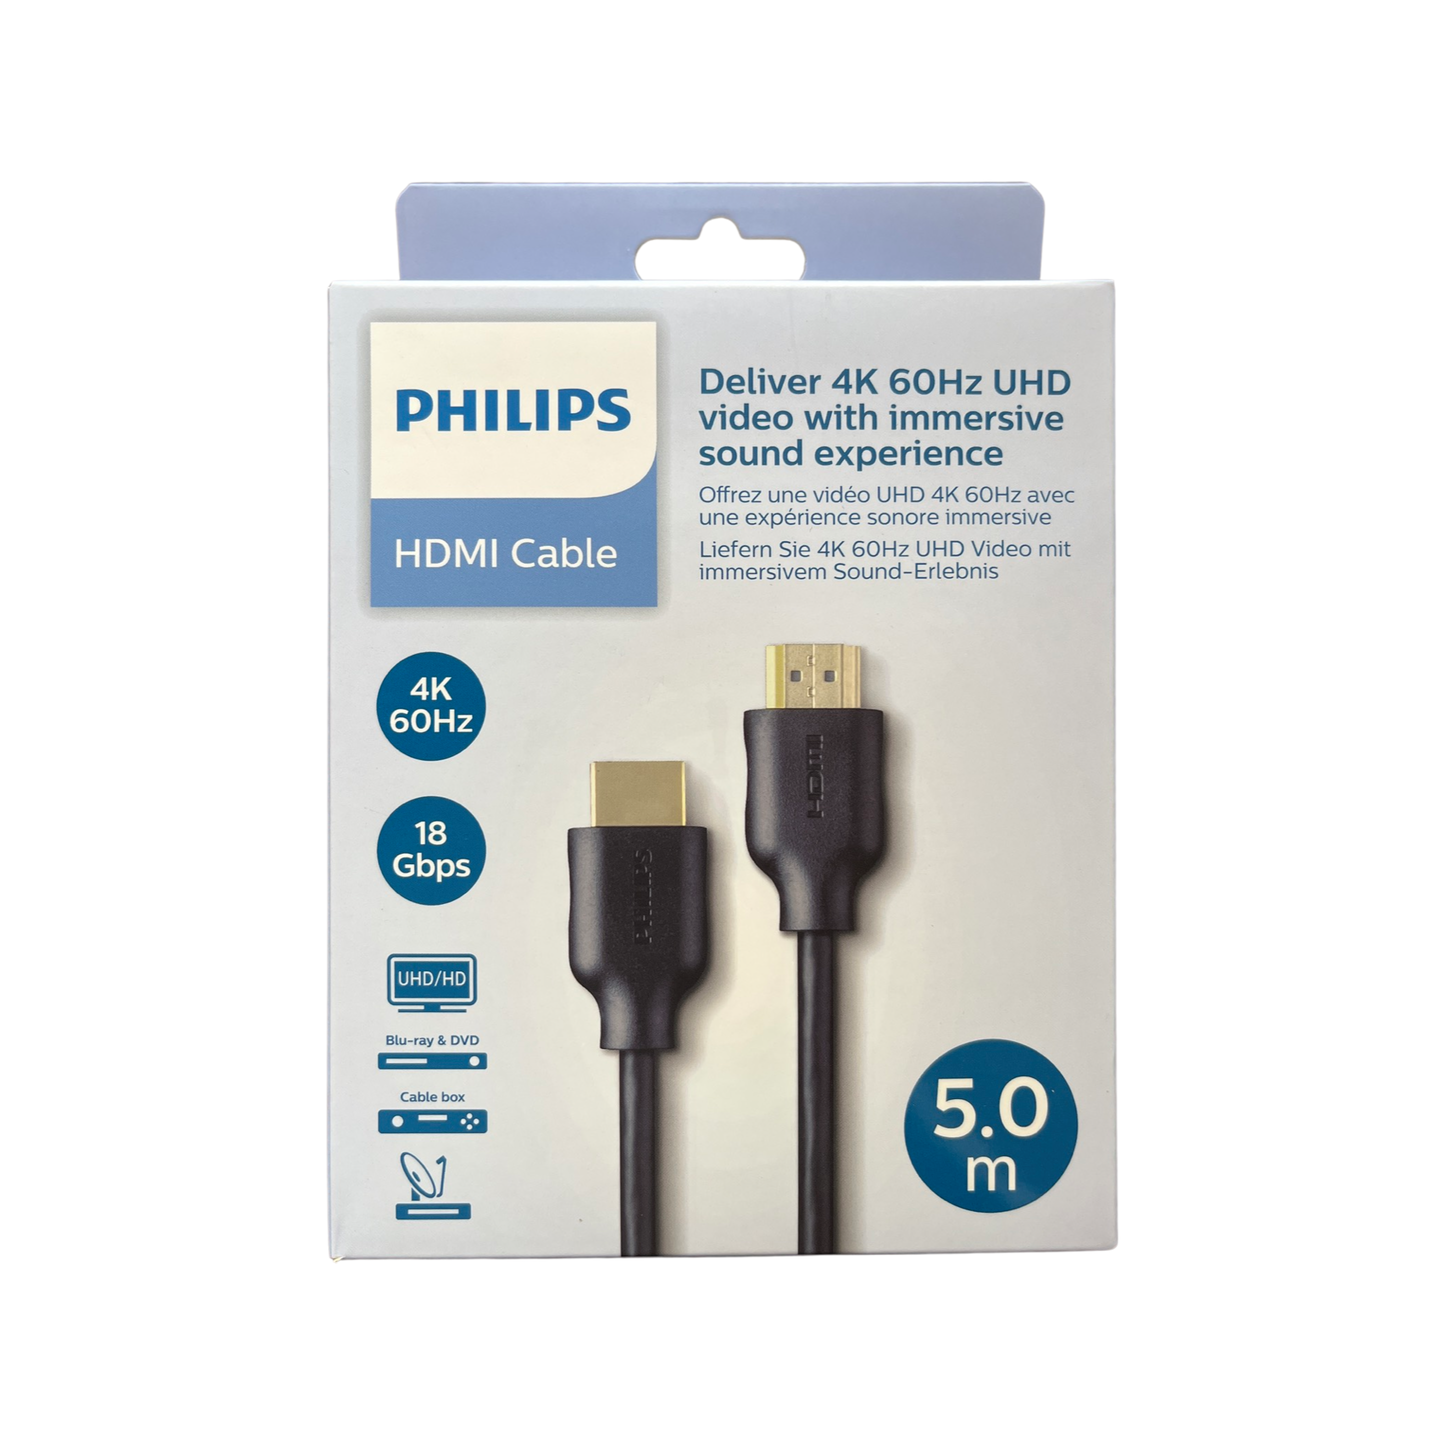 PHILIPS HDMI 2.0, 4K 60 HZ, 18GBPS, 32AWG, Colorbox, 5M-SWV5551/40